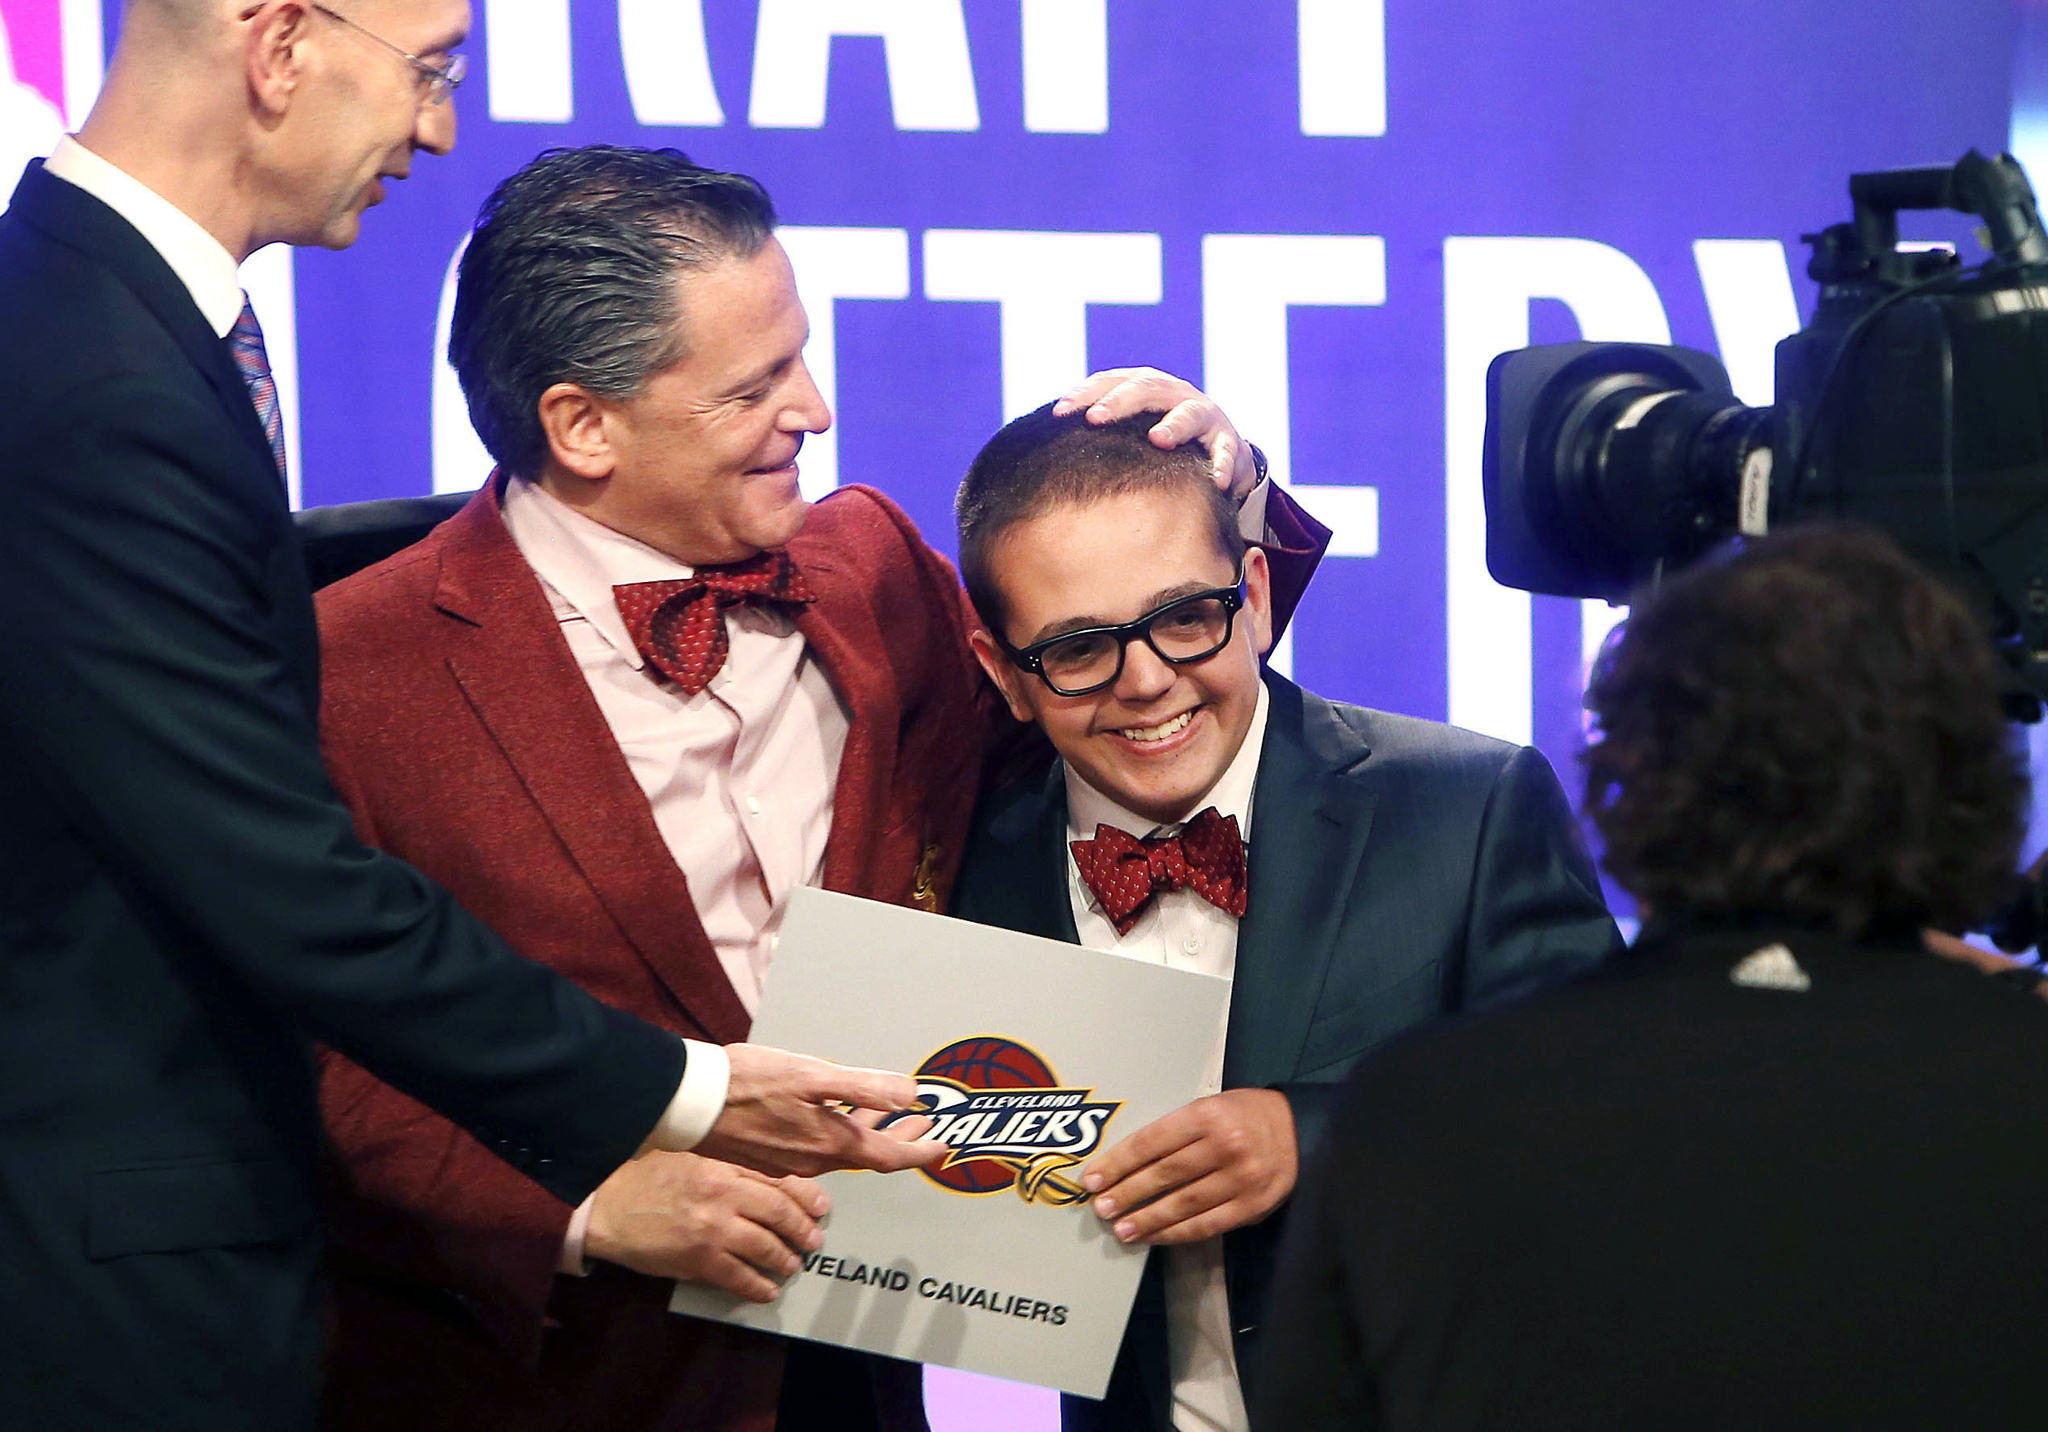 Cleveland Cavaliers owner Dan Gilbert and his son, Nick Gilbert in 2013